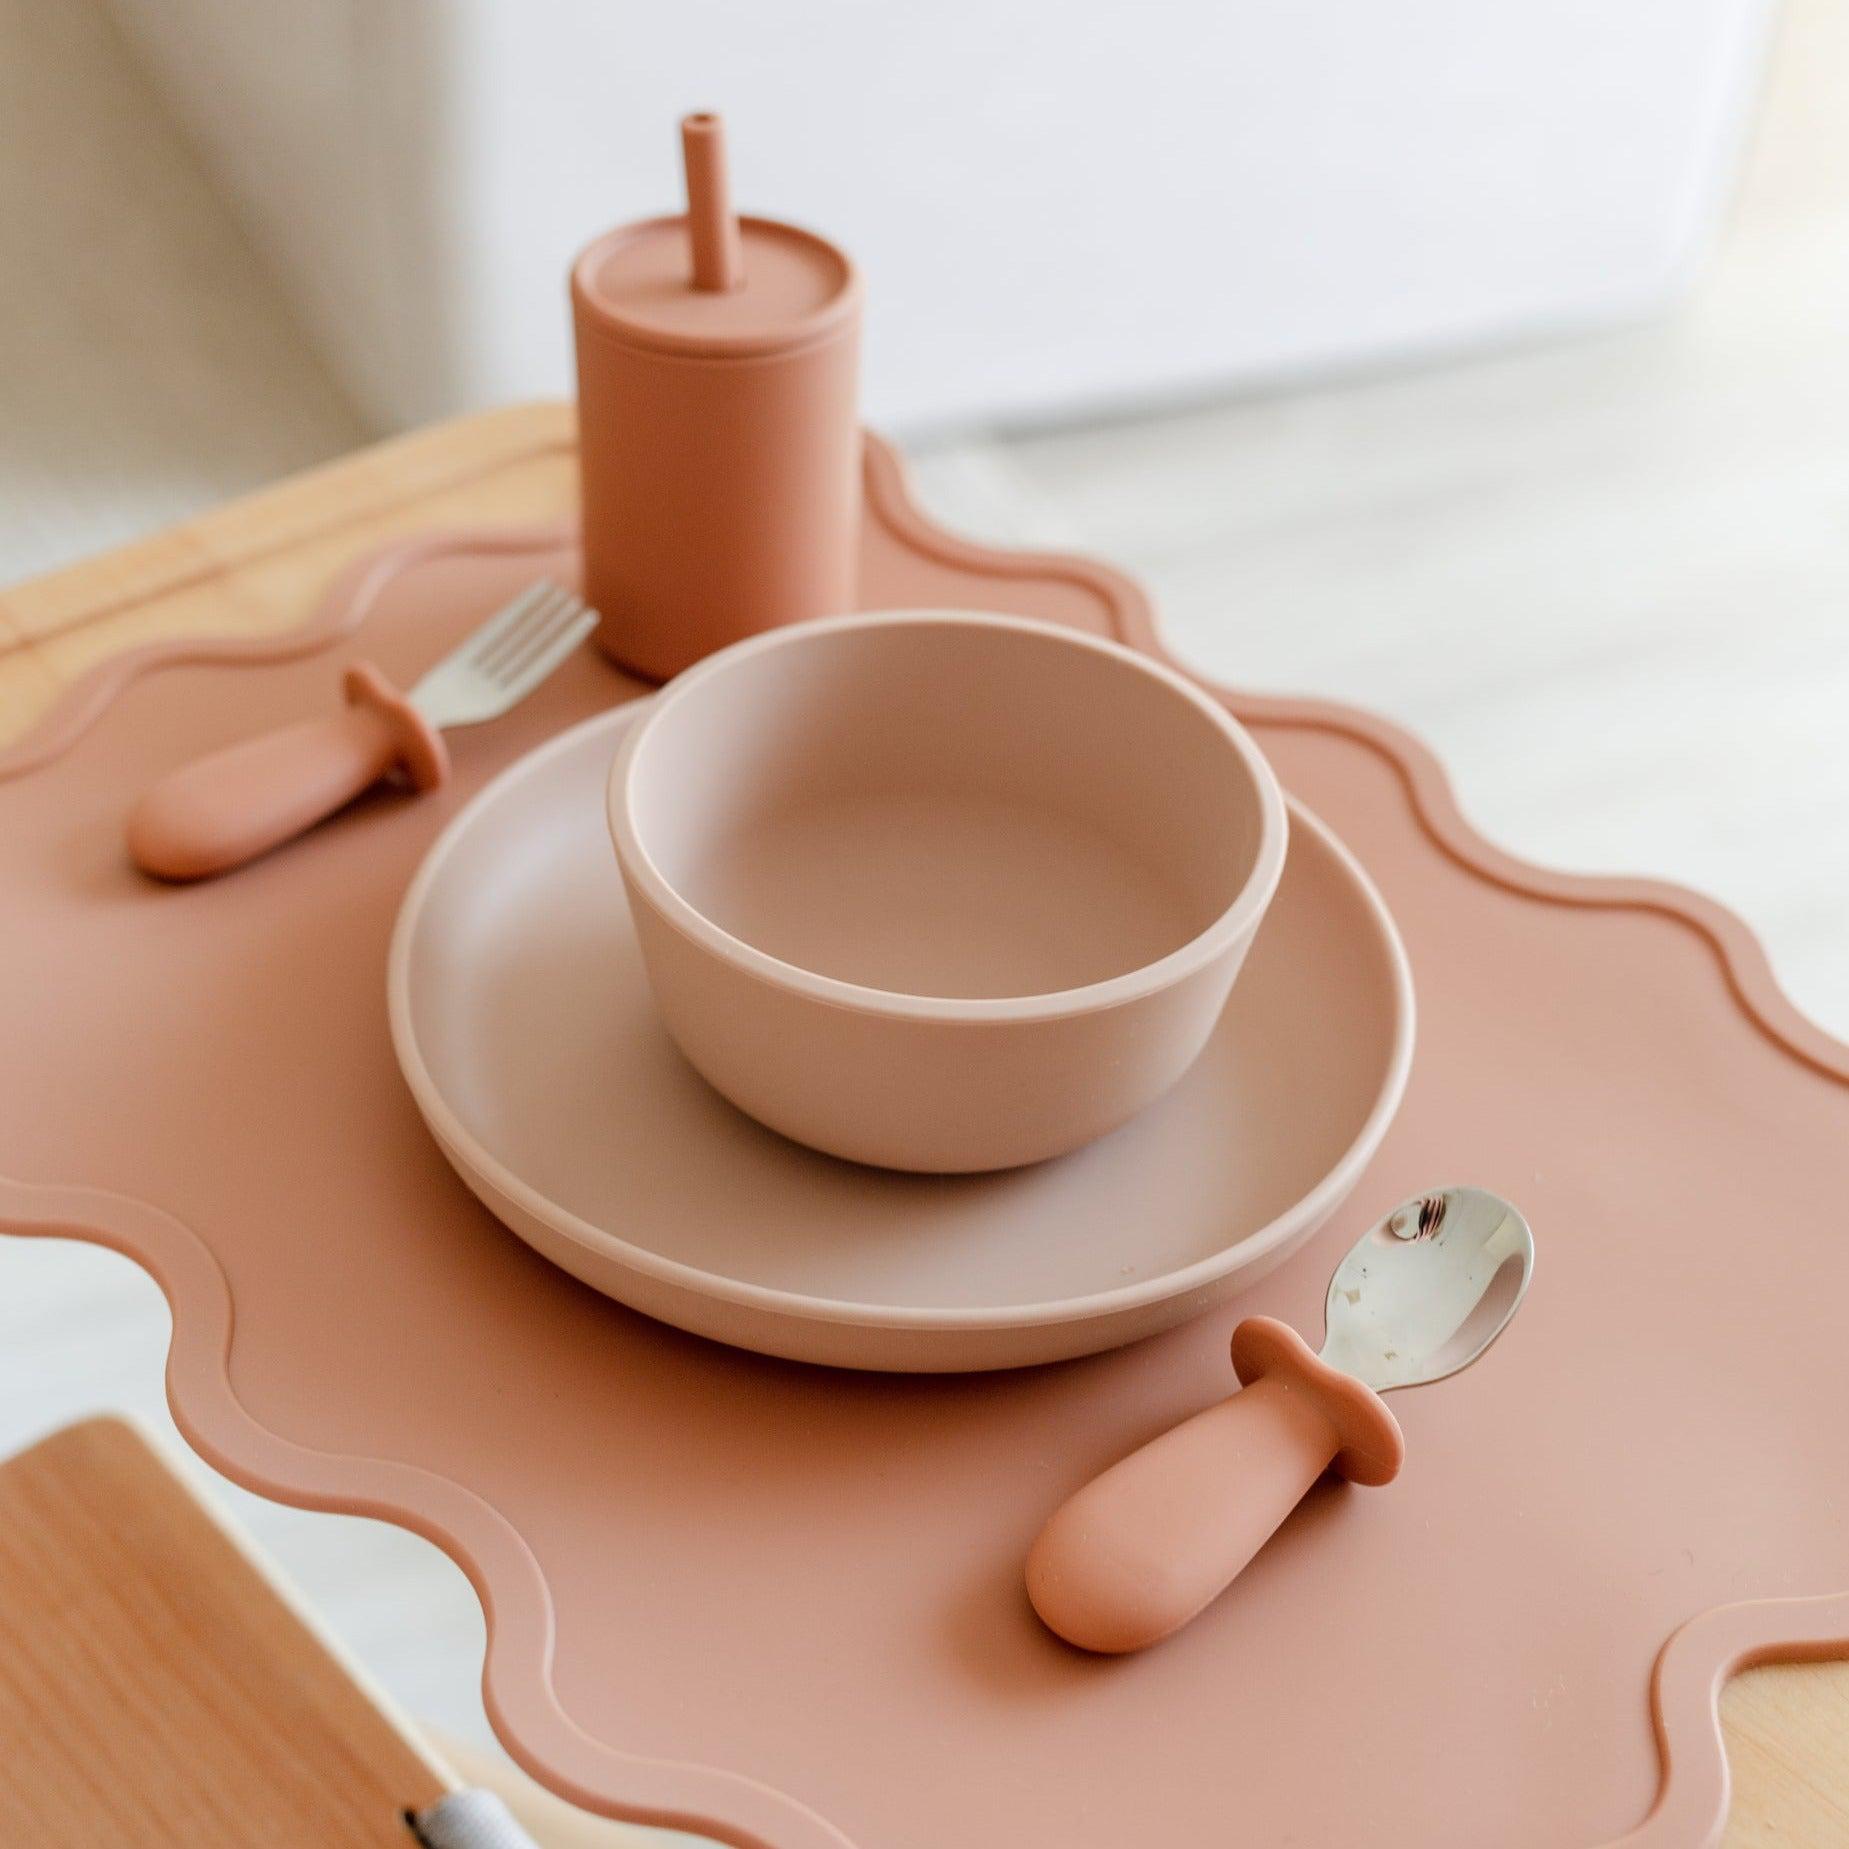 Encourage independence and mealtime with a Rommer toddler cutlery set in cinnamon on a table, perfect for curious little hands.